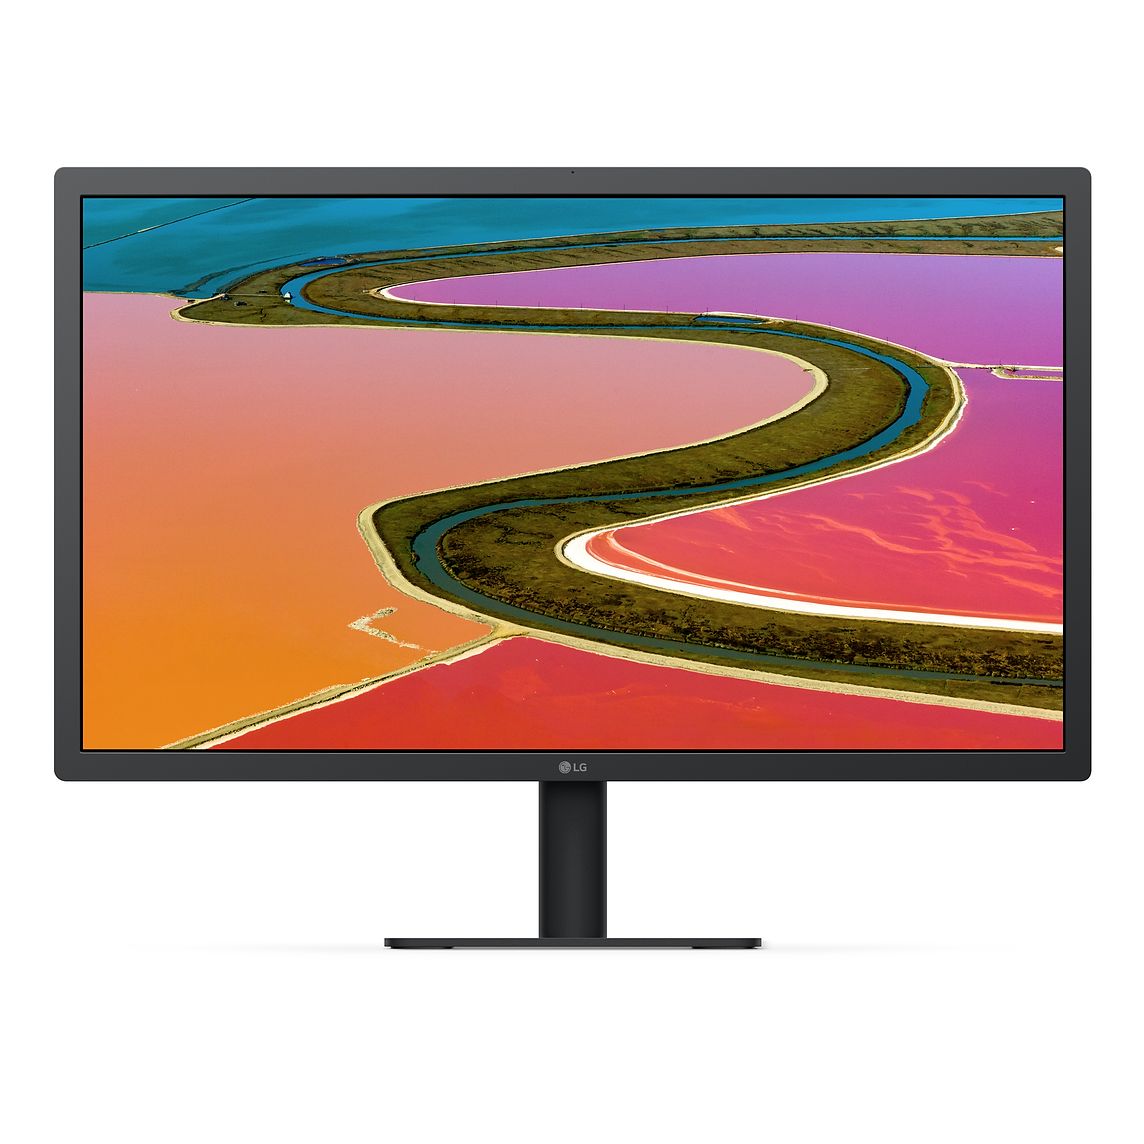 LG launches a new 4K UltraFine Display